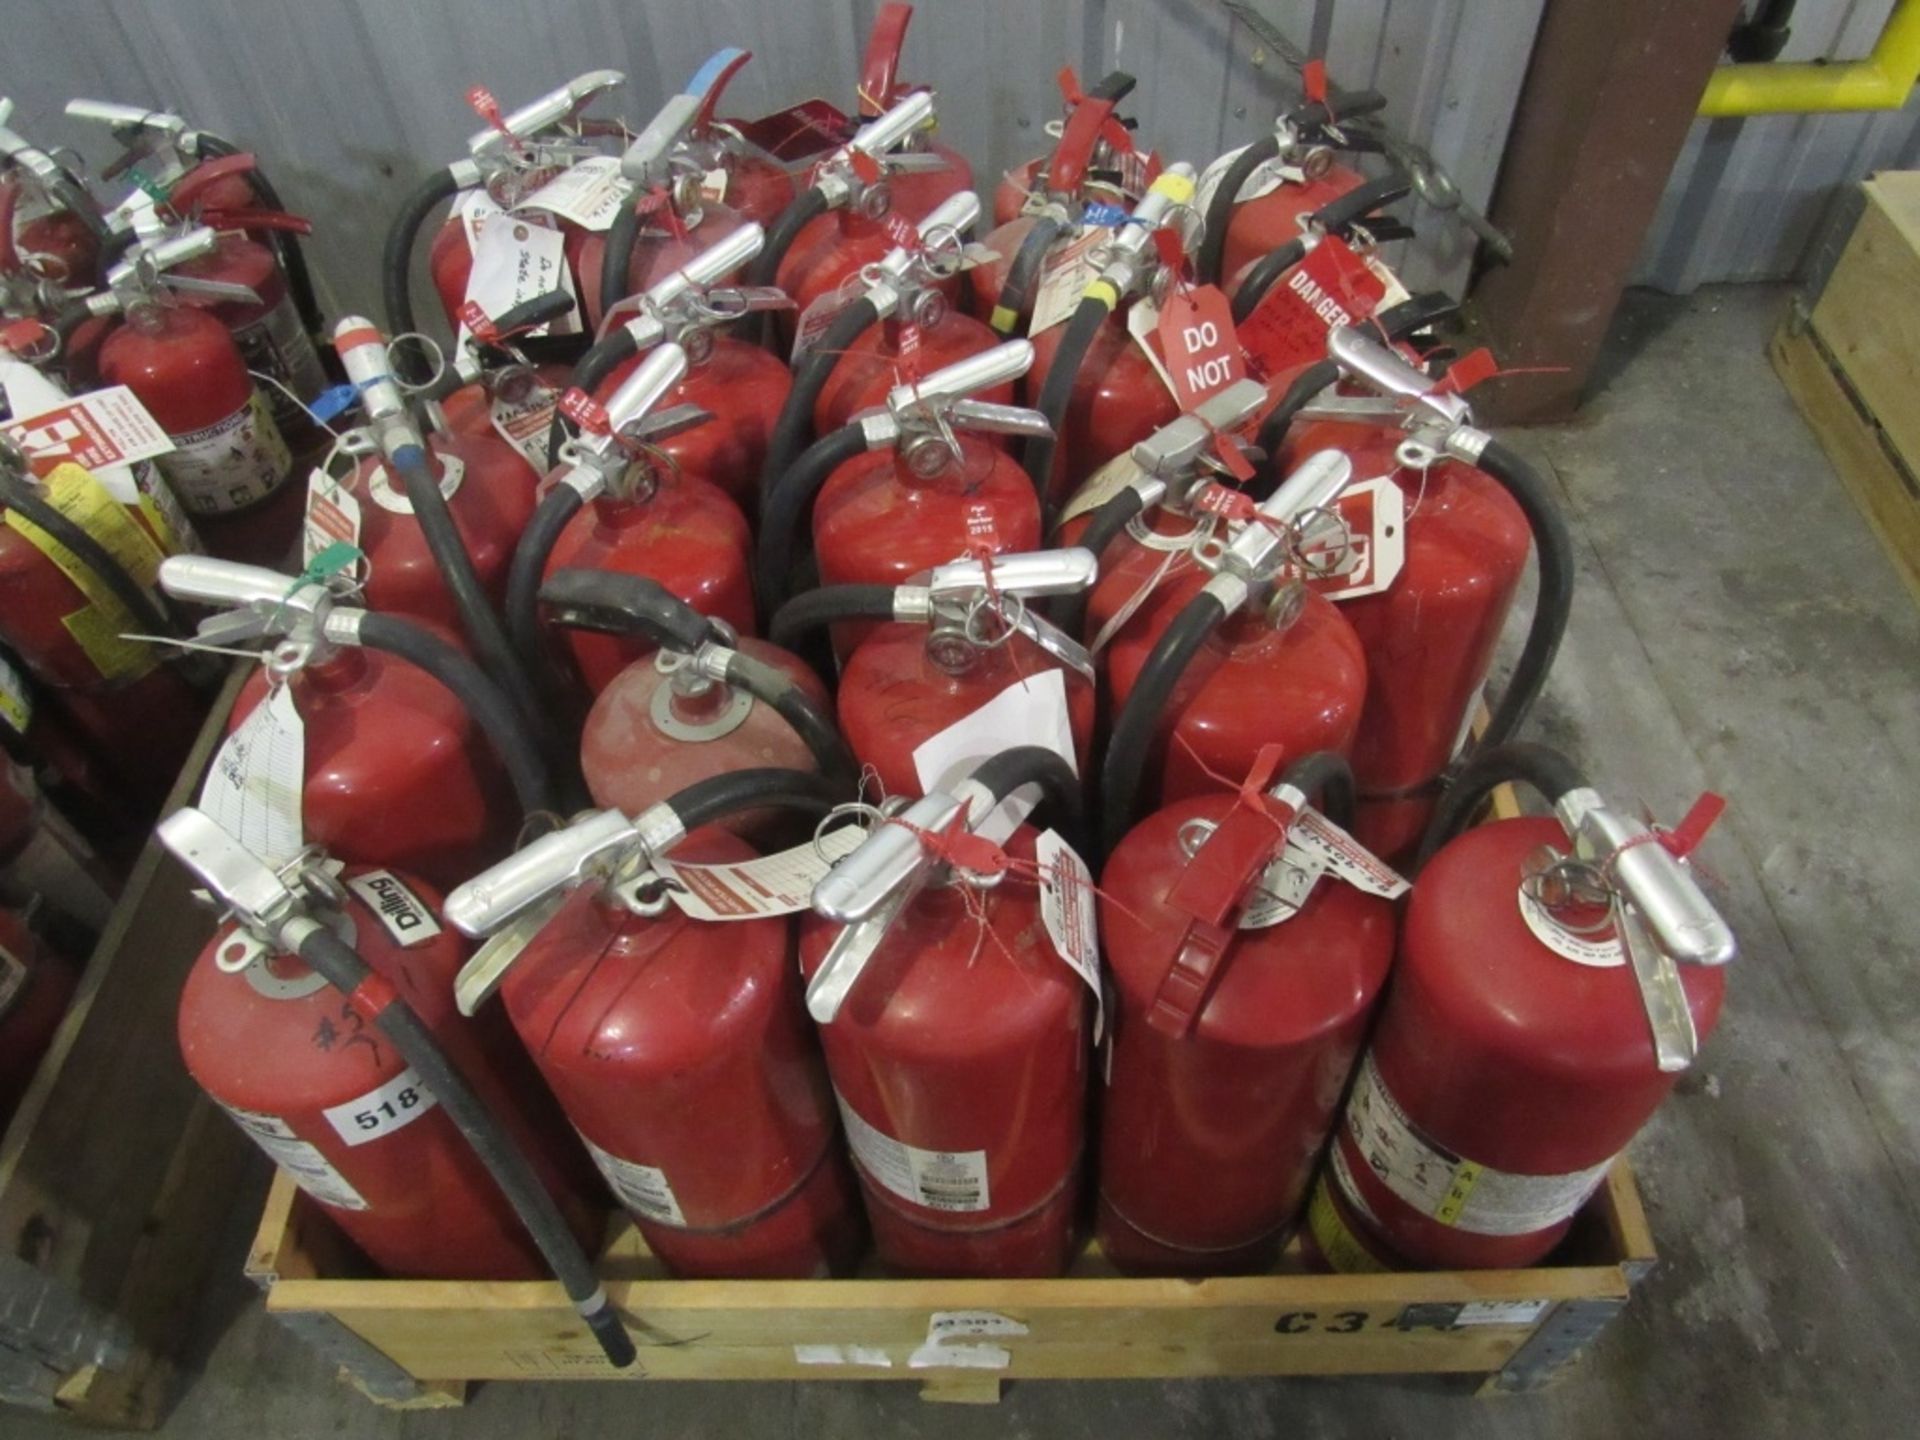 (qty - 29) Fire Extinguishers- ***Located in Cleveland, TN*** MFR's - Amerex, Dilling, Ansul 28 lbs